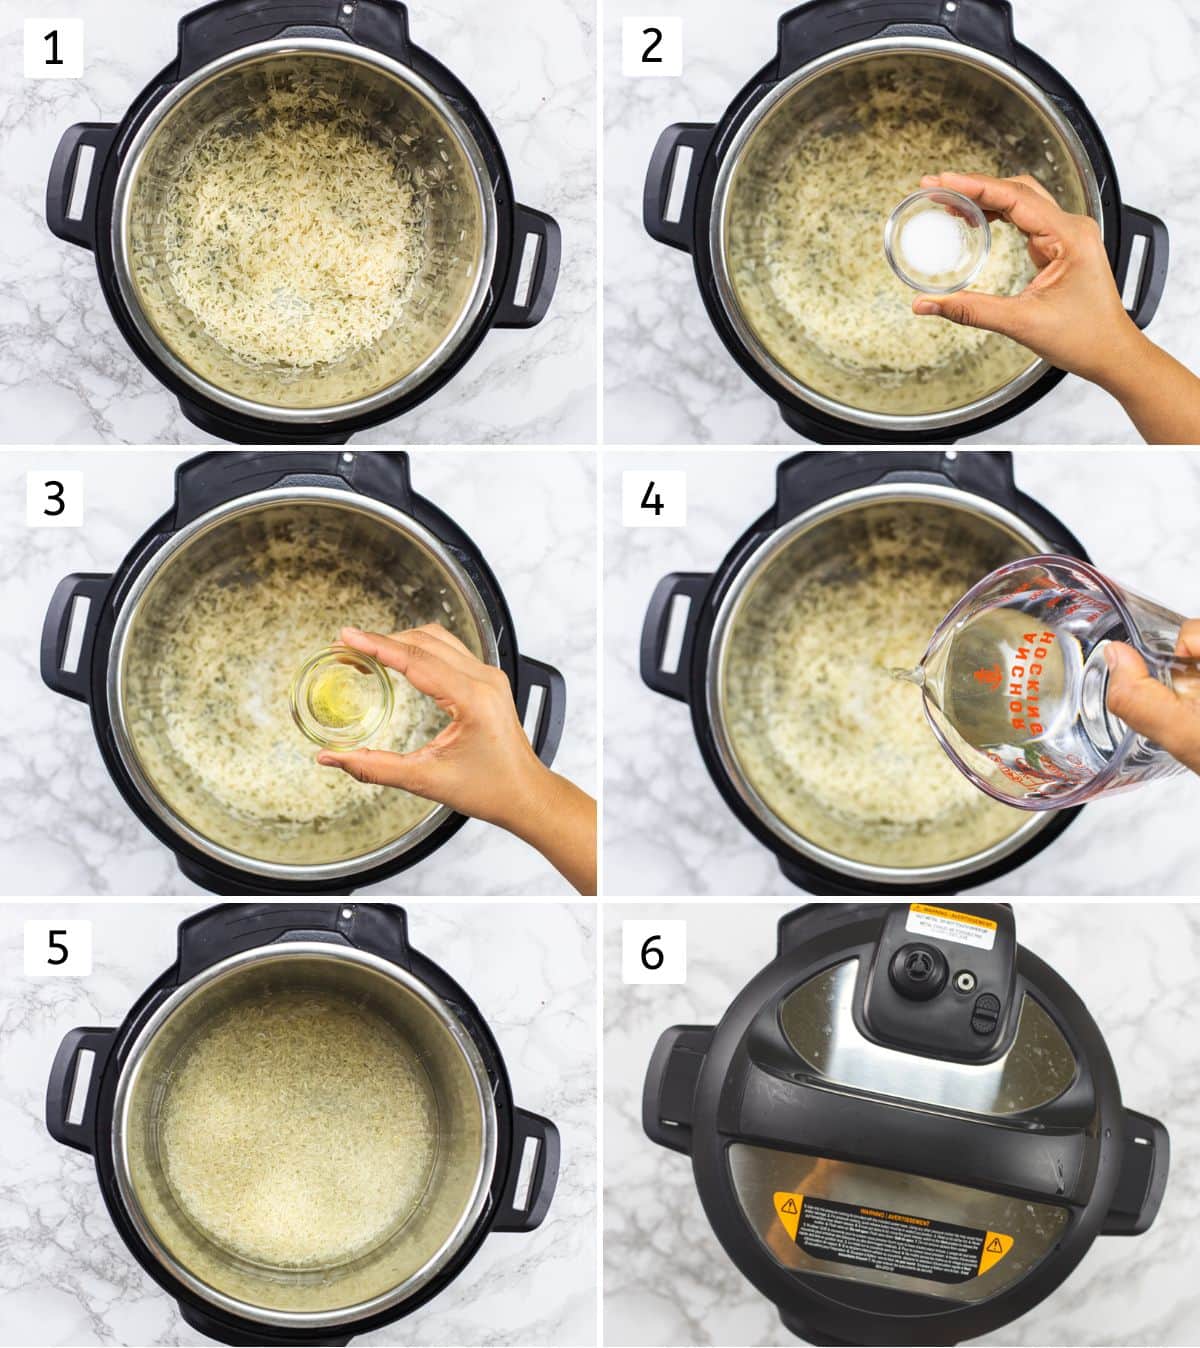 Collage of 6 images showing adding ingredients into instant pot for cooking rice.